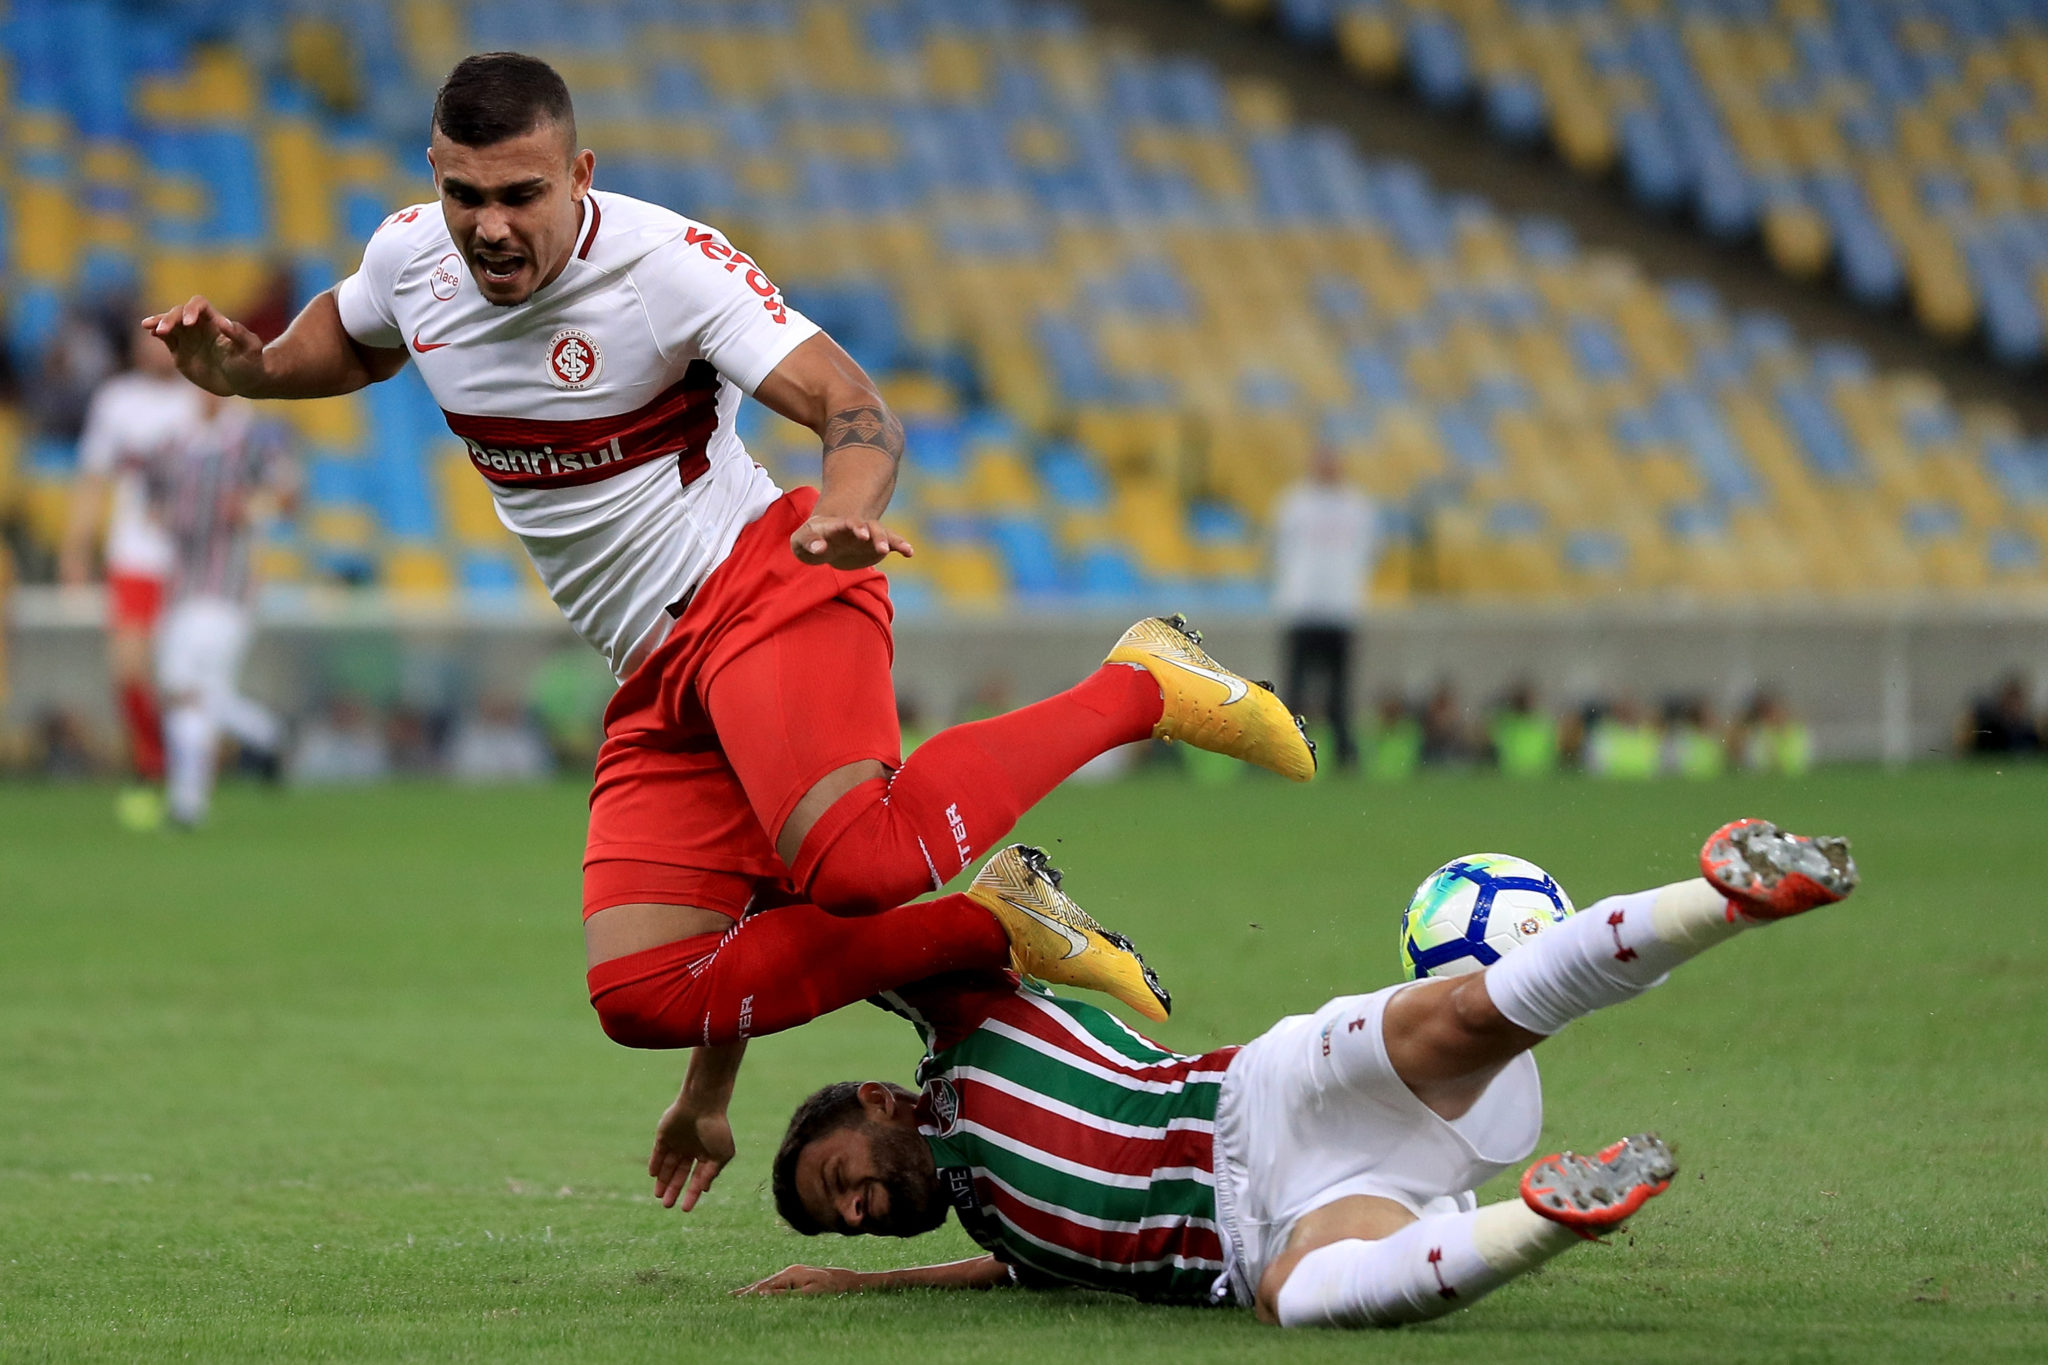 RIO DE JANEIRO, BRAZIL - AUGUST 13: Jadson (B) of Fluminense struggles for the ball with William Pottker of Internacional during a match between Fluminense and Internacional as part of Brasileirao Series A 2018 at Maracana Stadium on August 13, 2018 in Rio de Janeiro, Brazil. (Photo by Buda Mendes/Getty Images)